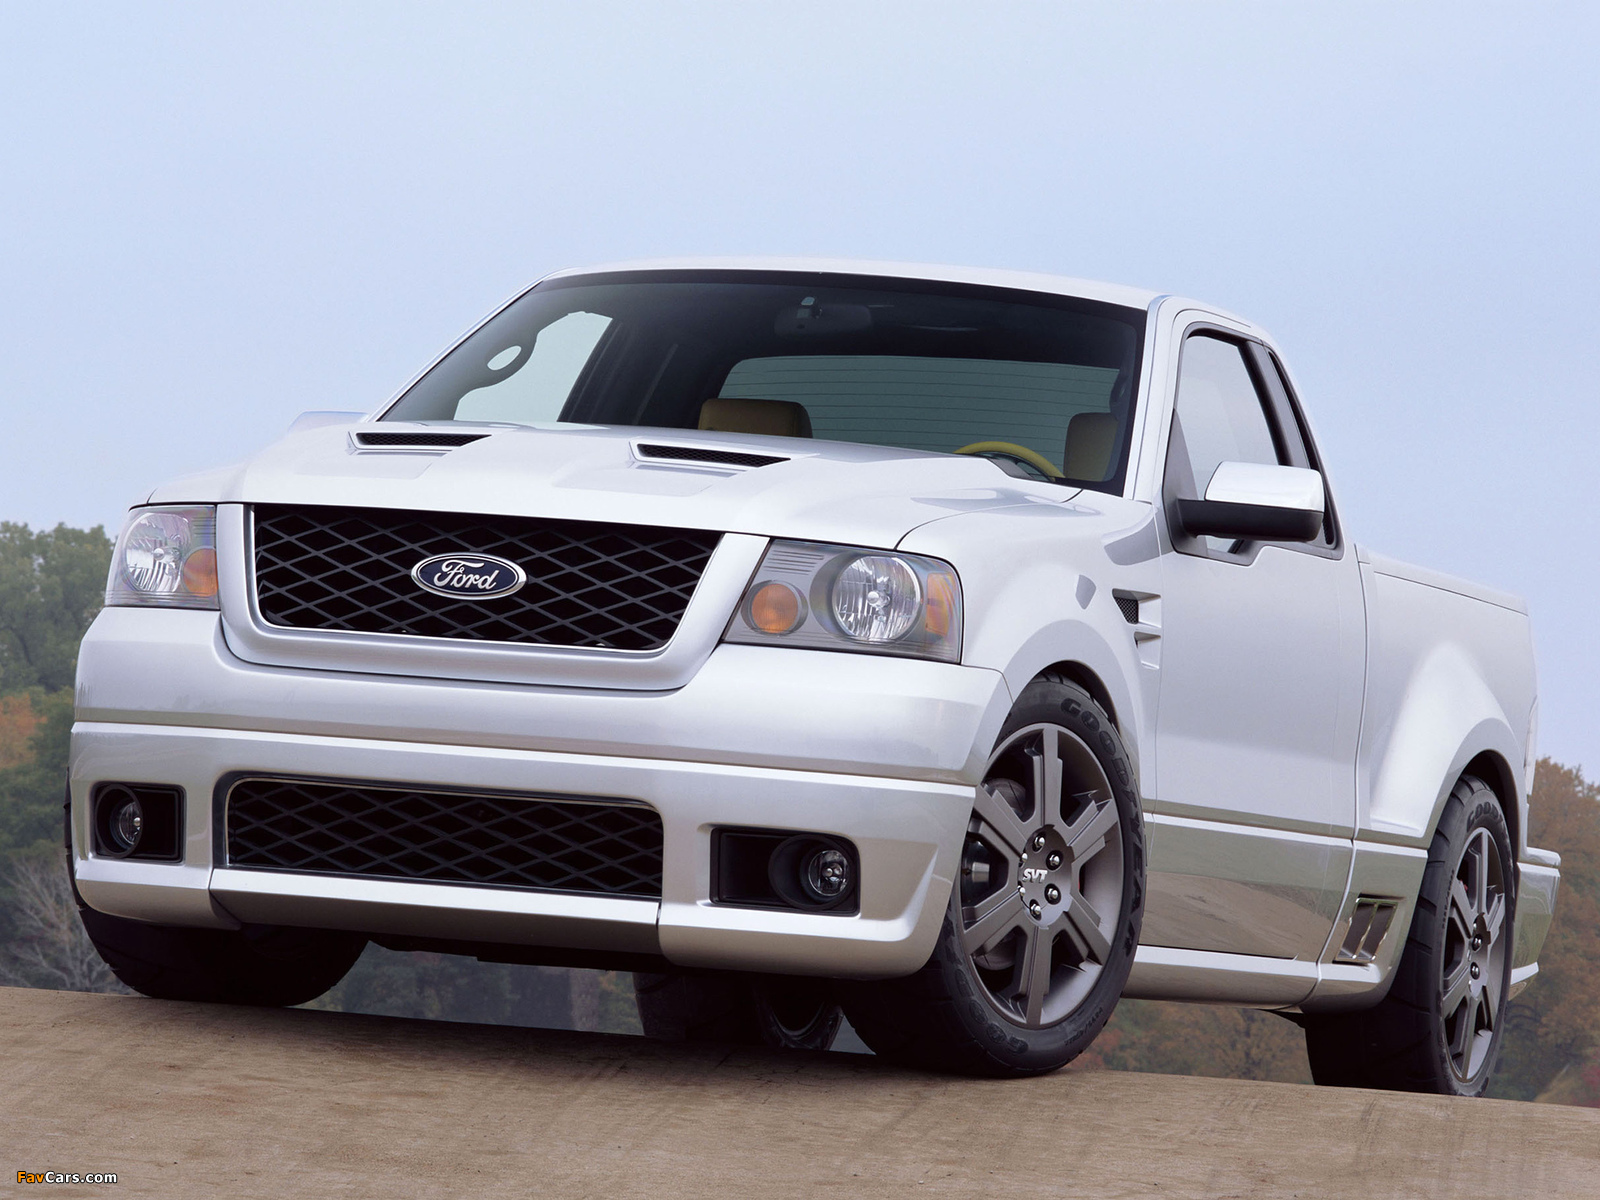 Ford SVT F-150 Lightning Concept 2003 pictures (1600 x 1200)